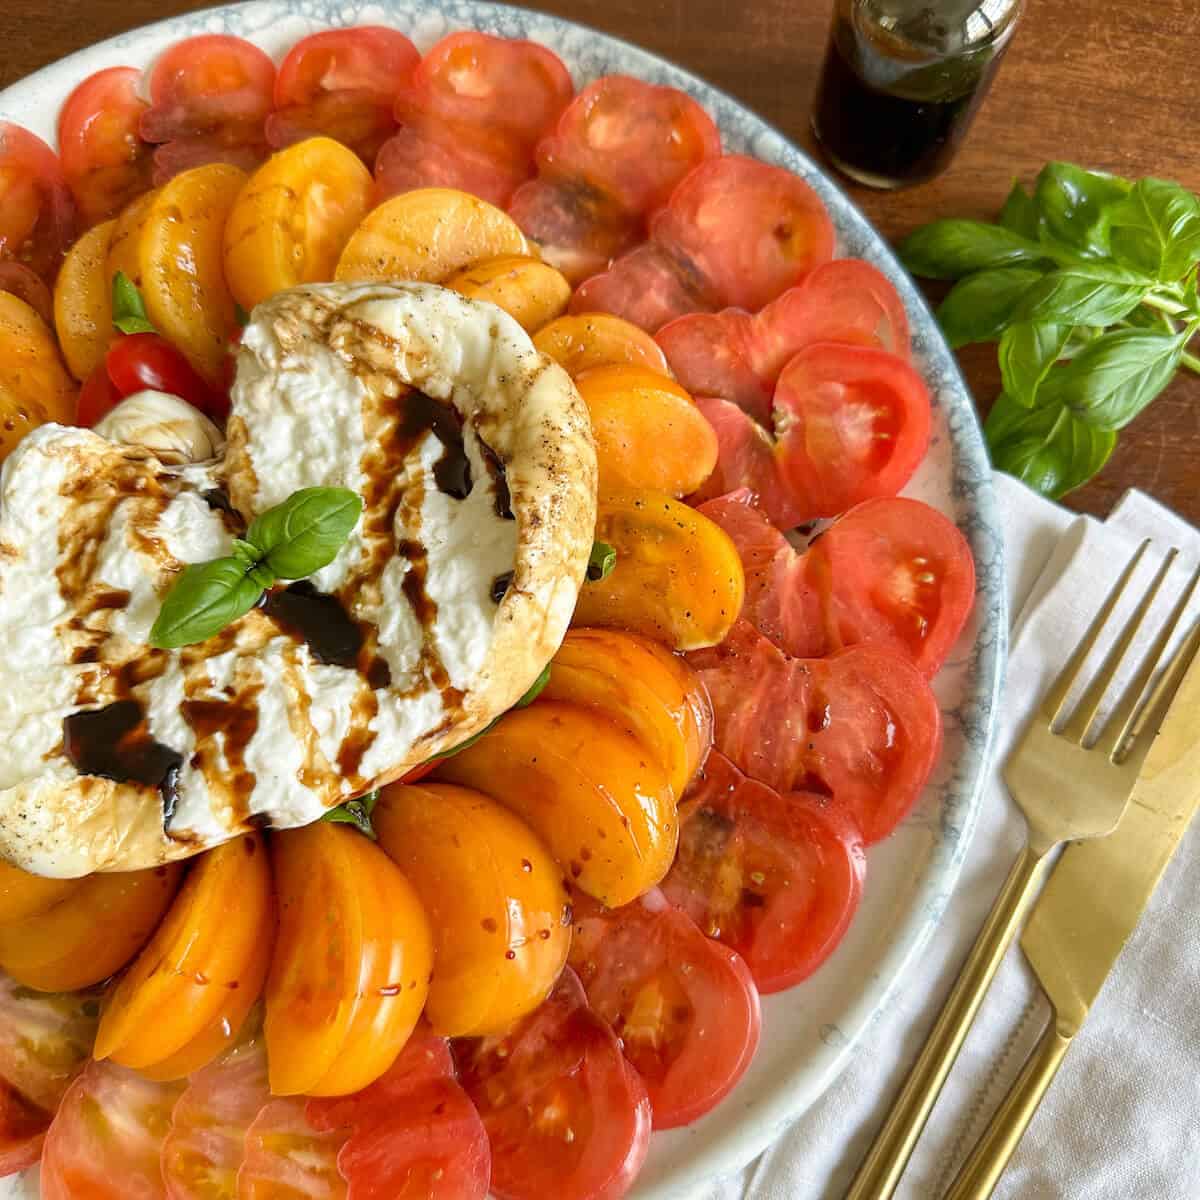 A platter of burrata salad with fresh tomatoes and basil next to a knife snd fork.